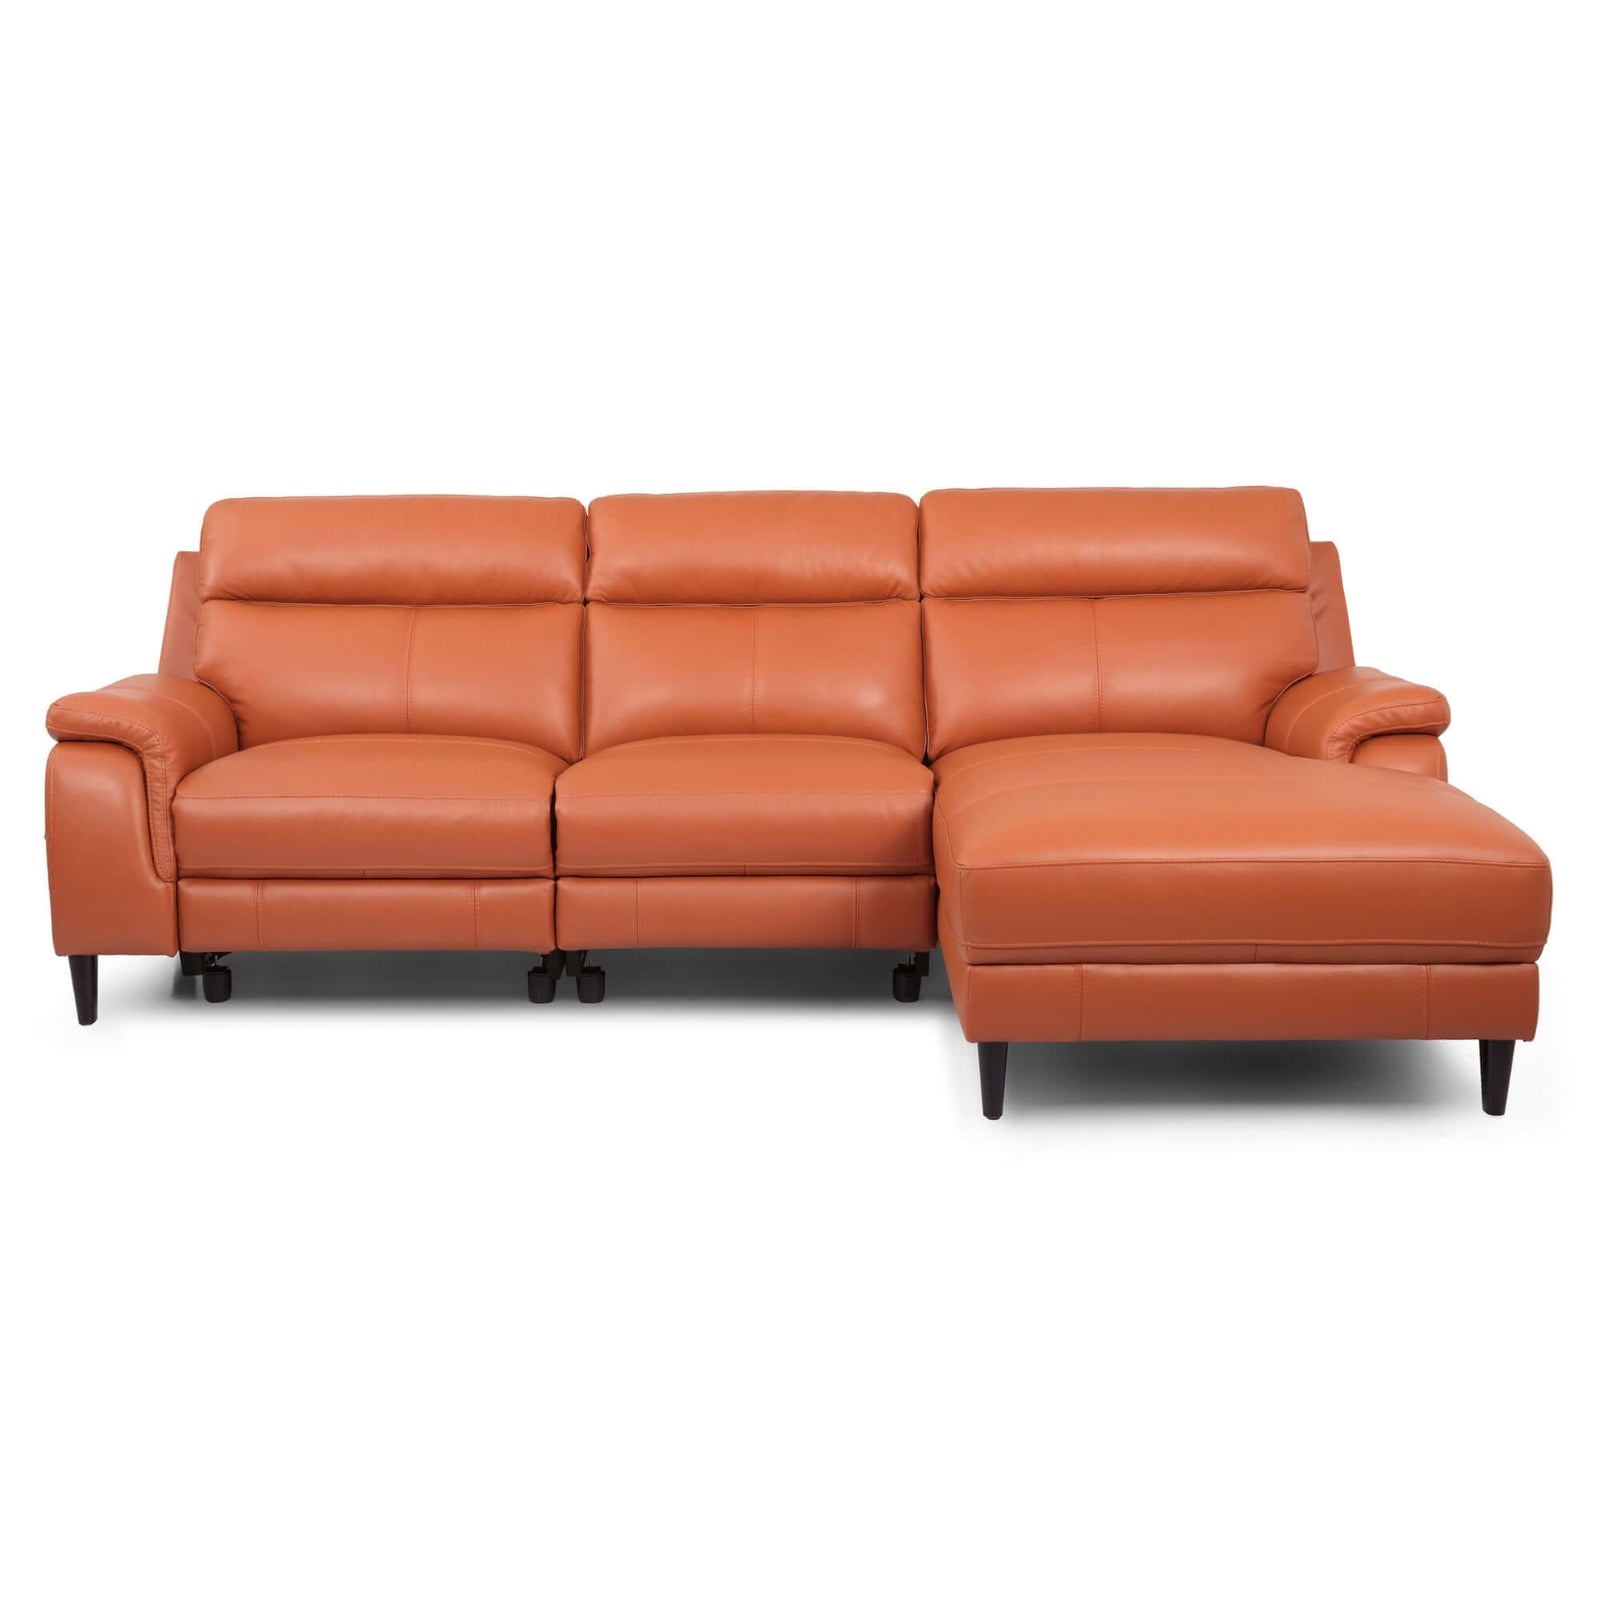 Ella 3 Seater Genuine Leather Sofa Lounge Electric Powered Recliner RHF Chaise Tan-Upinteriors